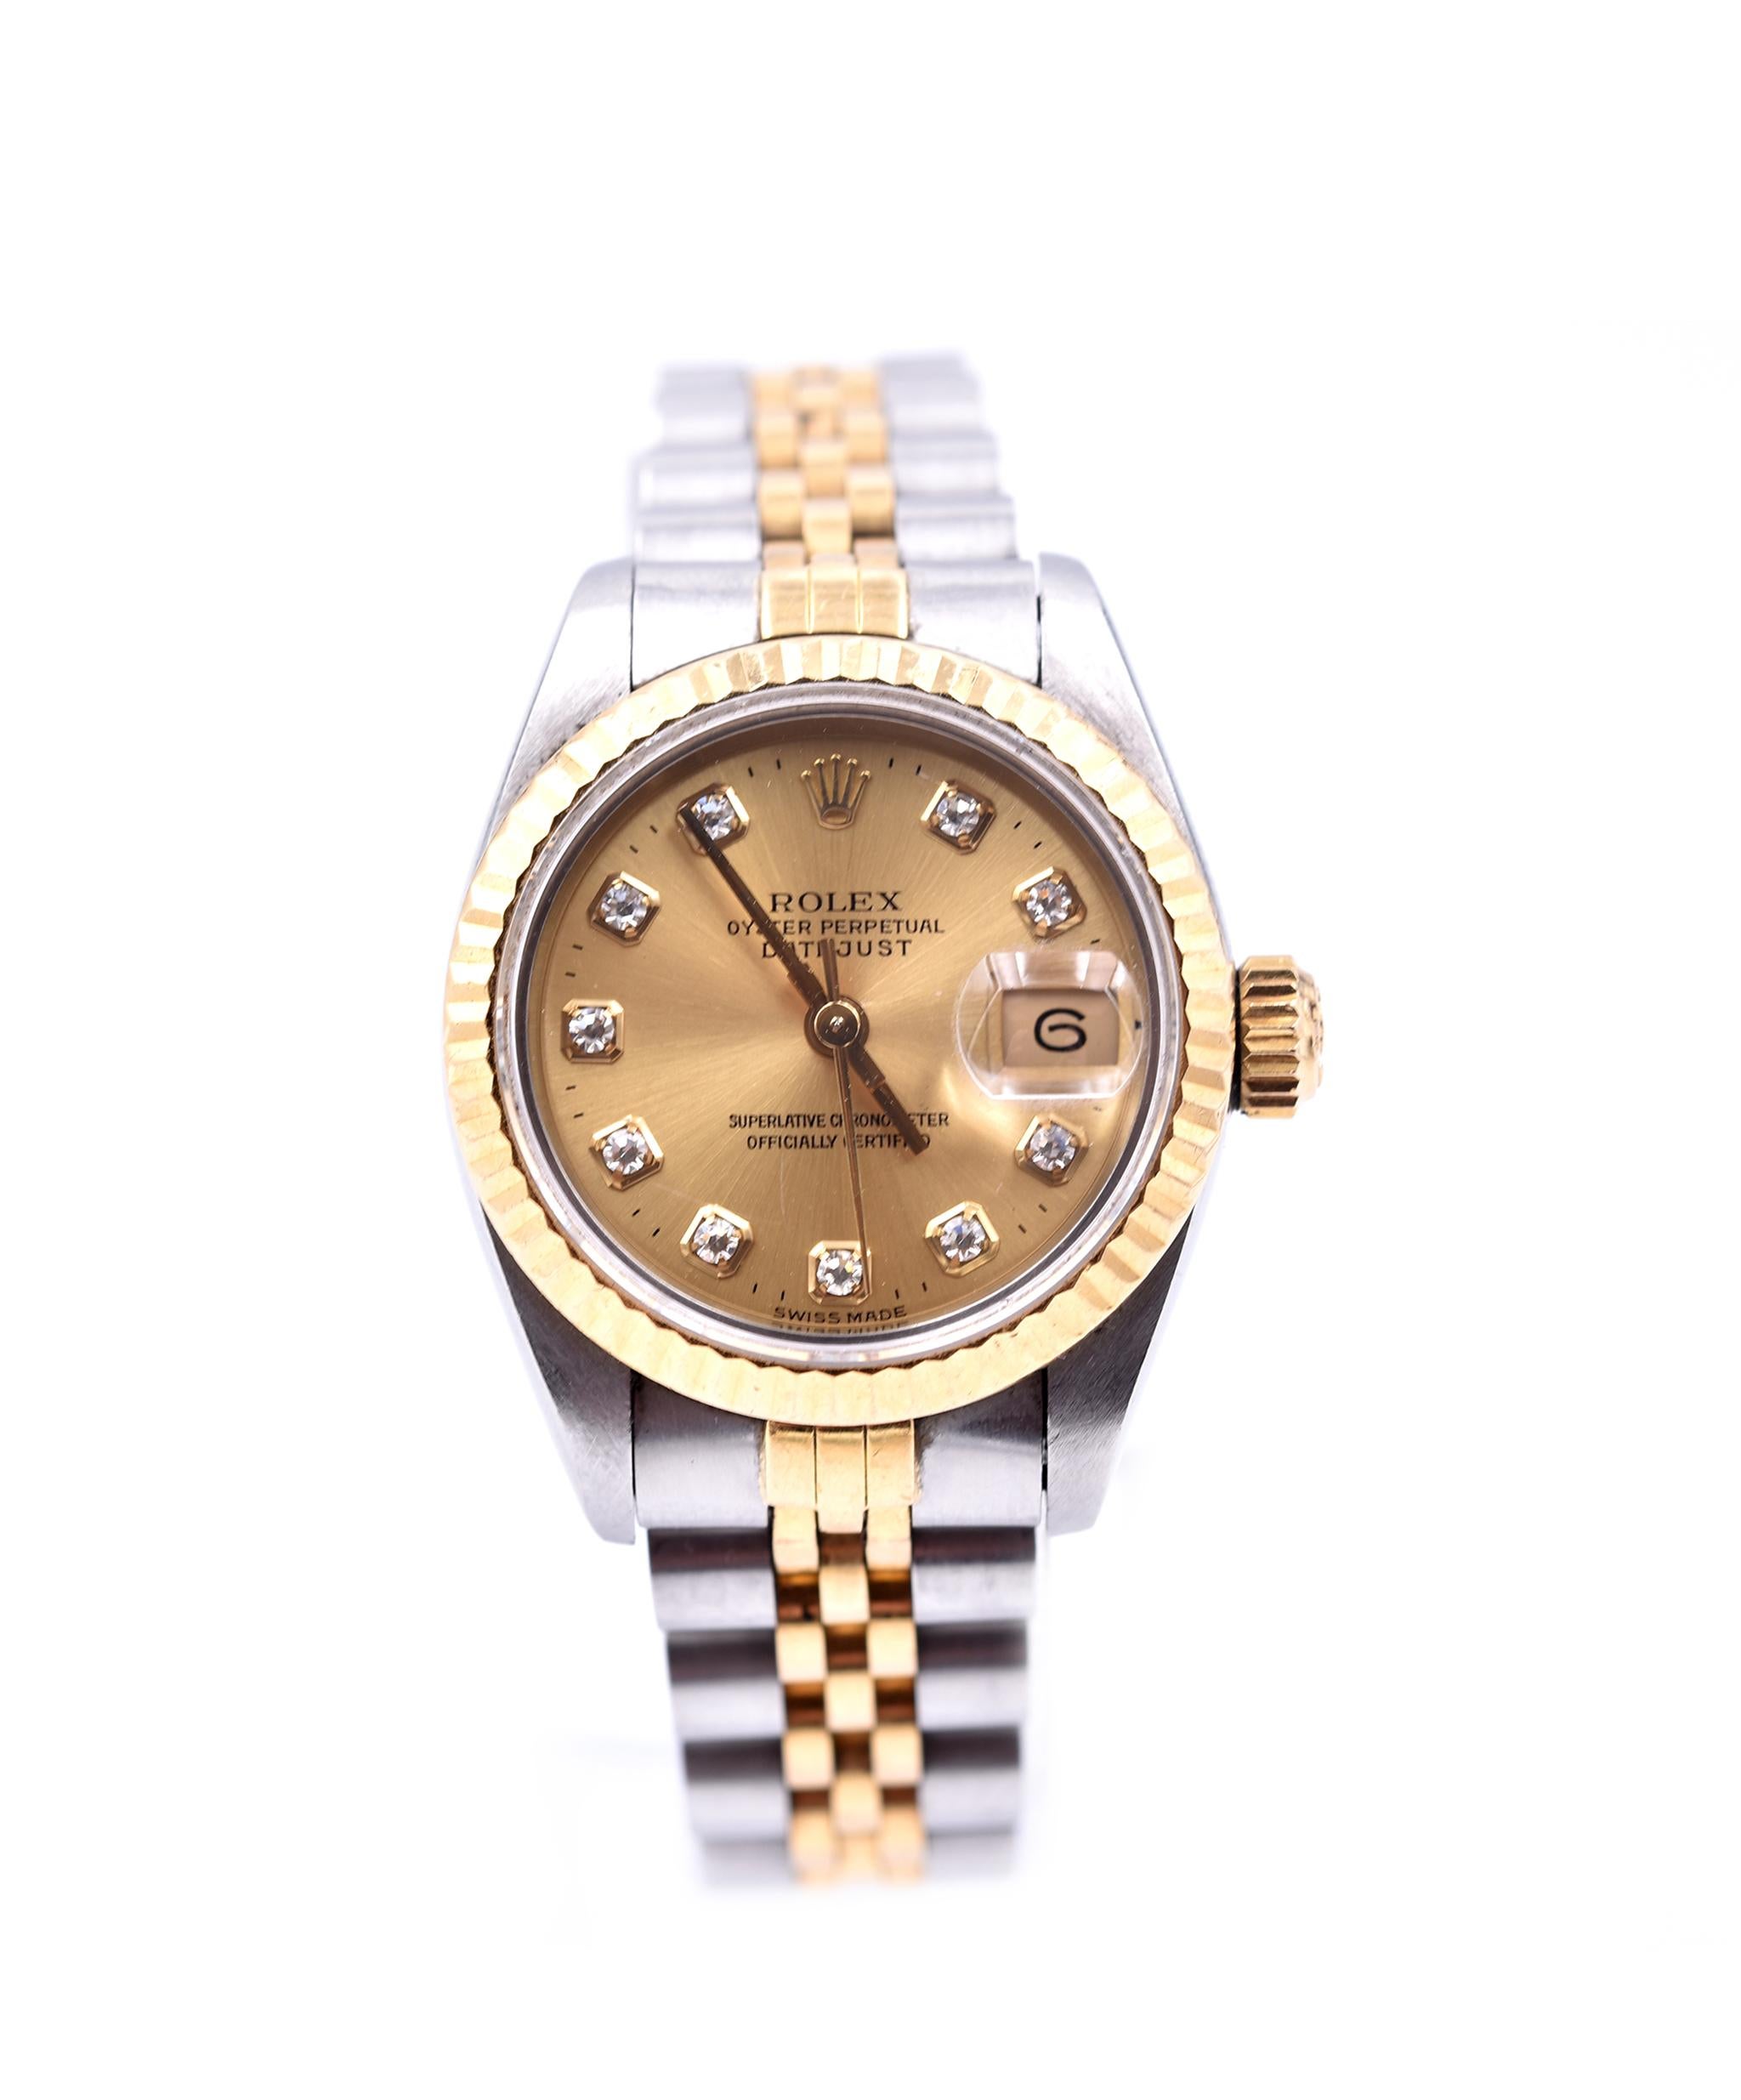 Movement: automatic
Function: hours, minutes, sweep seconds, date at 3 o’clock 
Case: 26mm steel case, sapphire crystal, 18k yellow gold fluted bezel
Band: steel/18k yellow gold jubilee bracelet and fold-over clasp
Dial: champagne diamond dial, gold